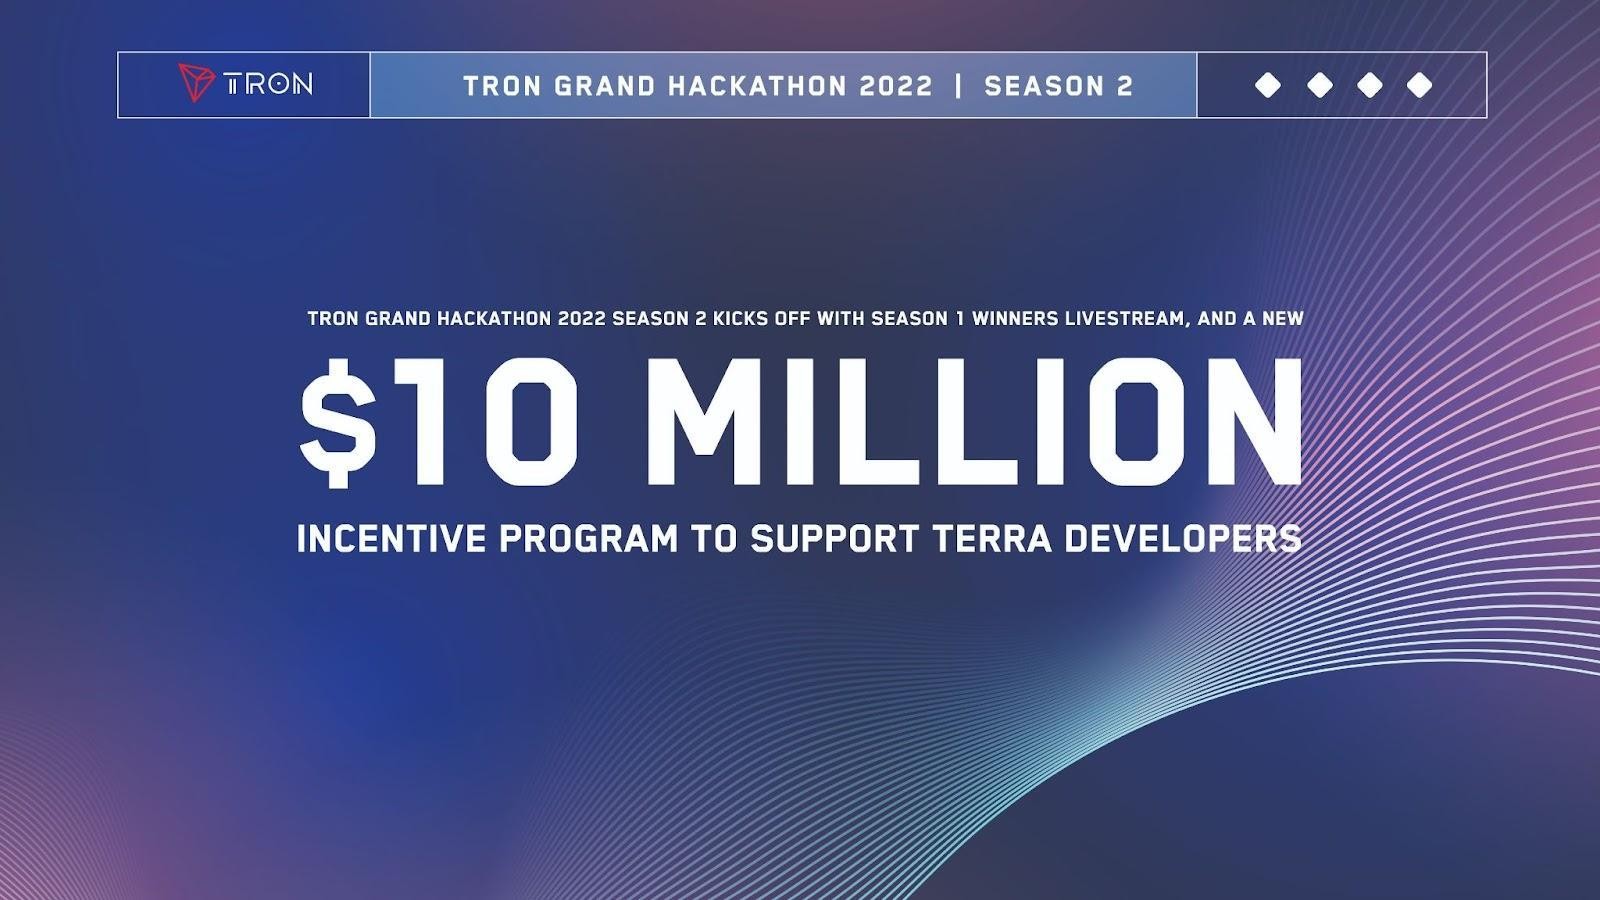 TRON Grand Hackathon 2022 Season 2 Kicks Off With Season 1 Winners Livestream and a New $10 Million Incentive Program to Support Terra Developers